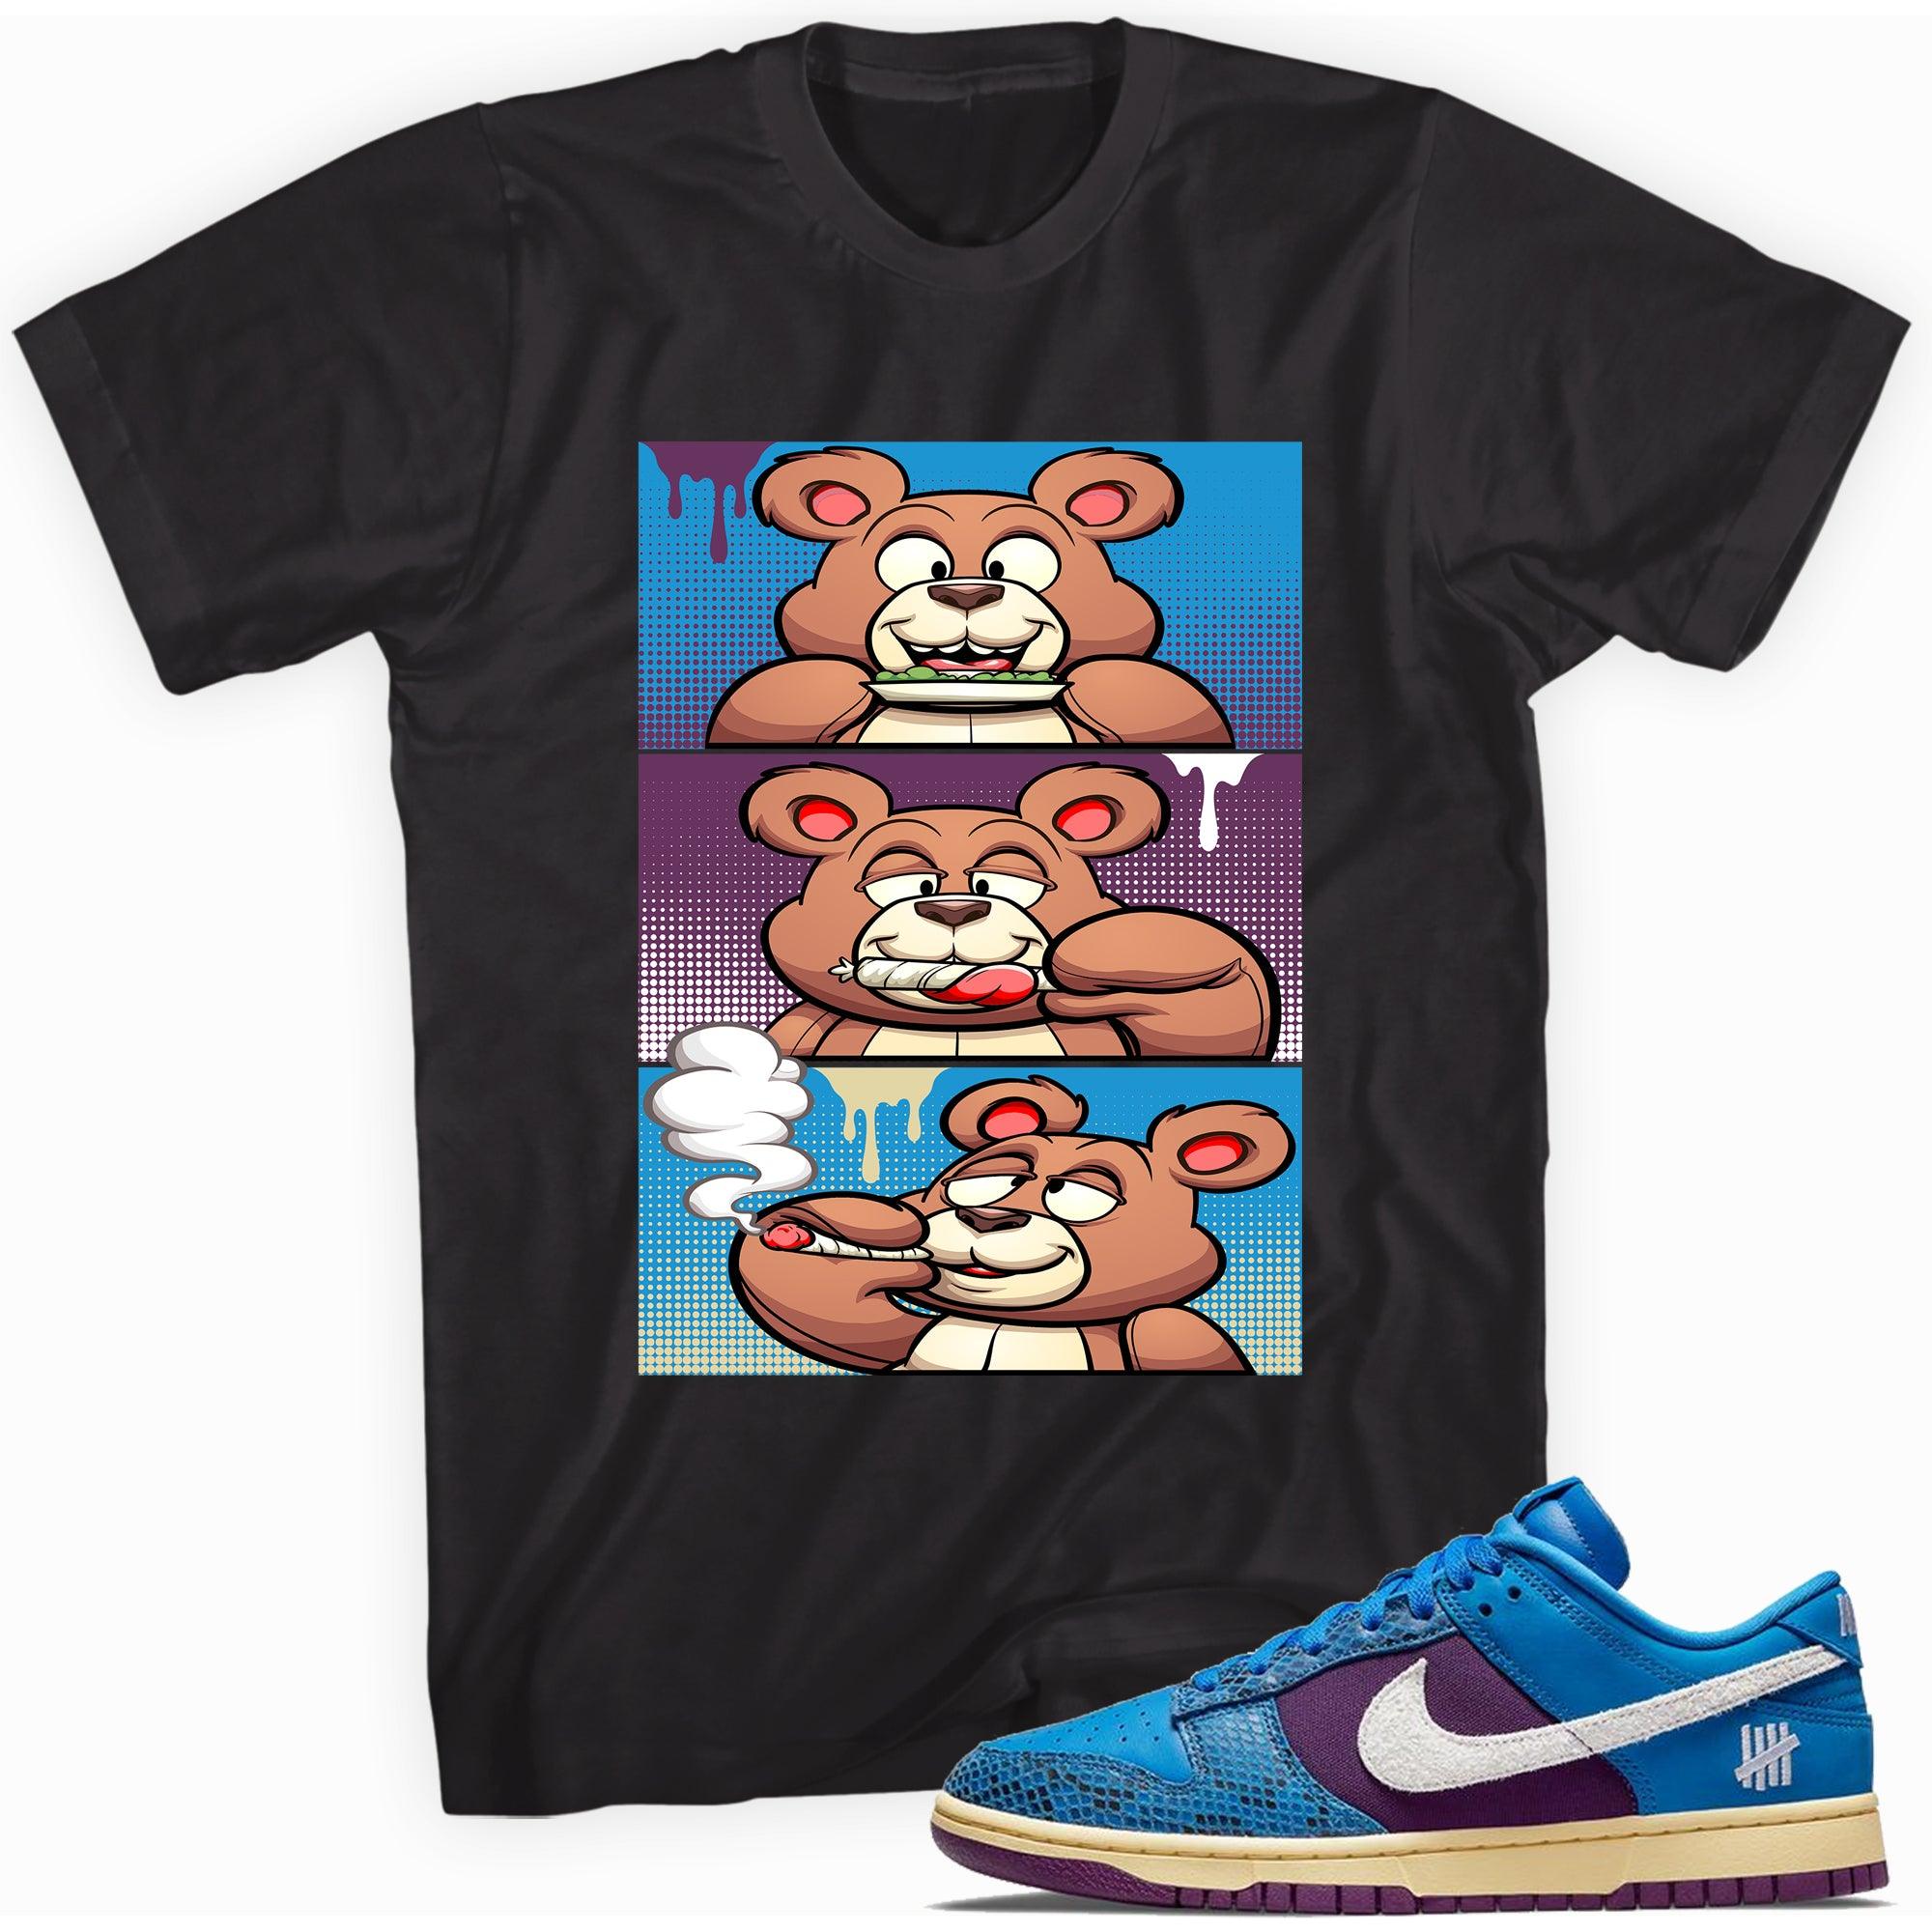 Roll It Shirt Nike Dunk Low Undefeated 5 On It Dunk vs AF1 photo